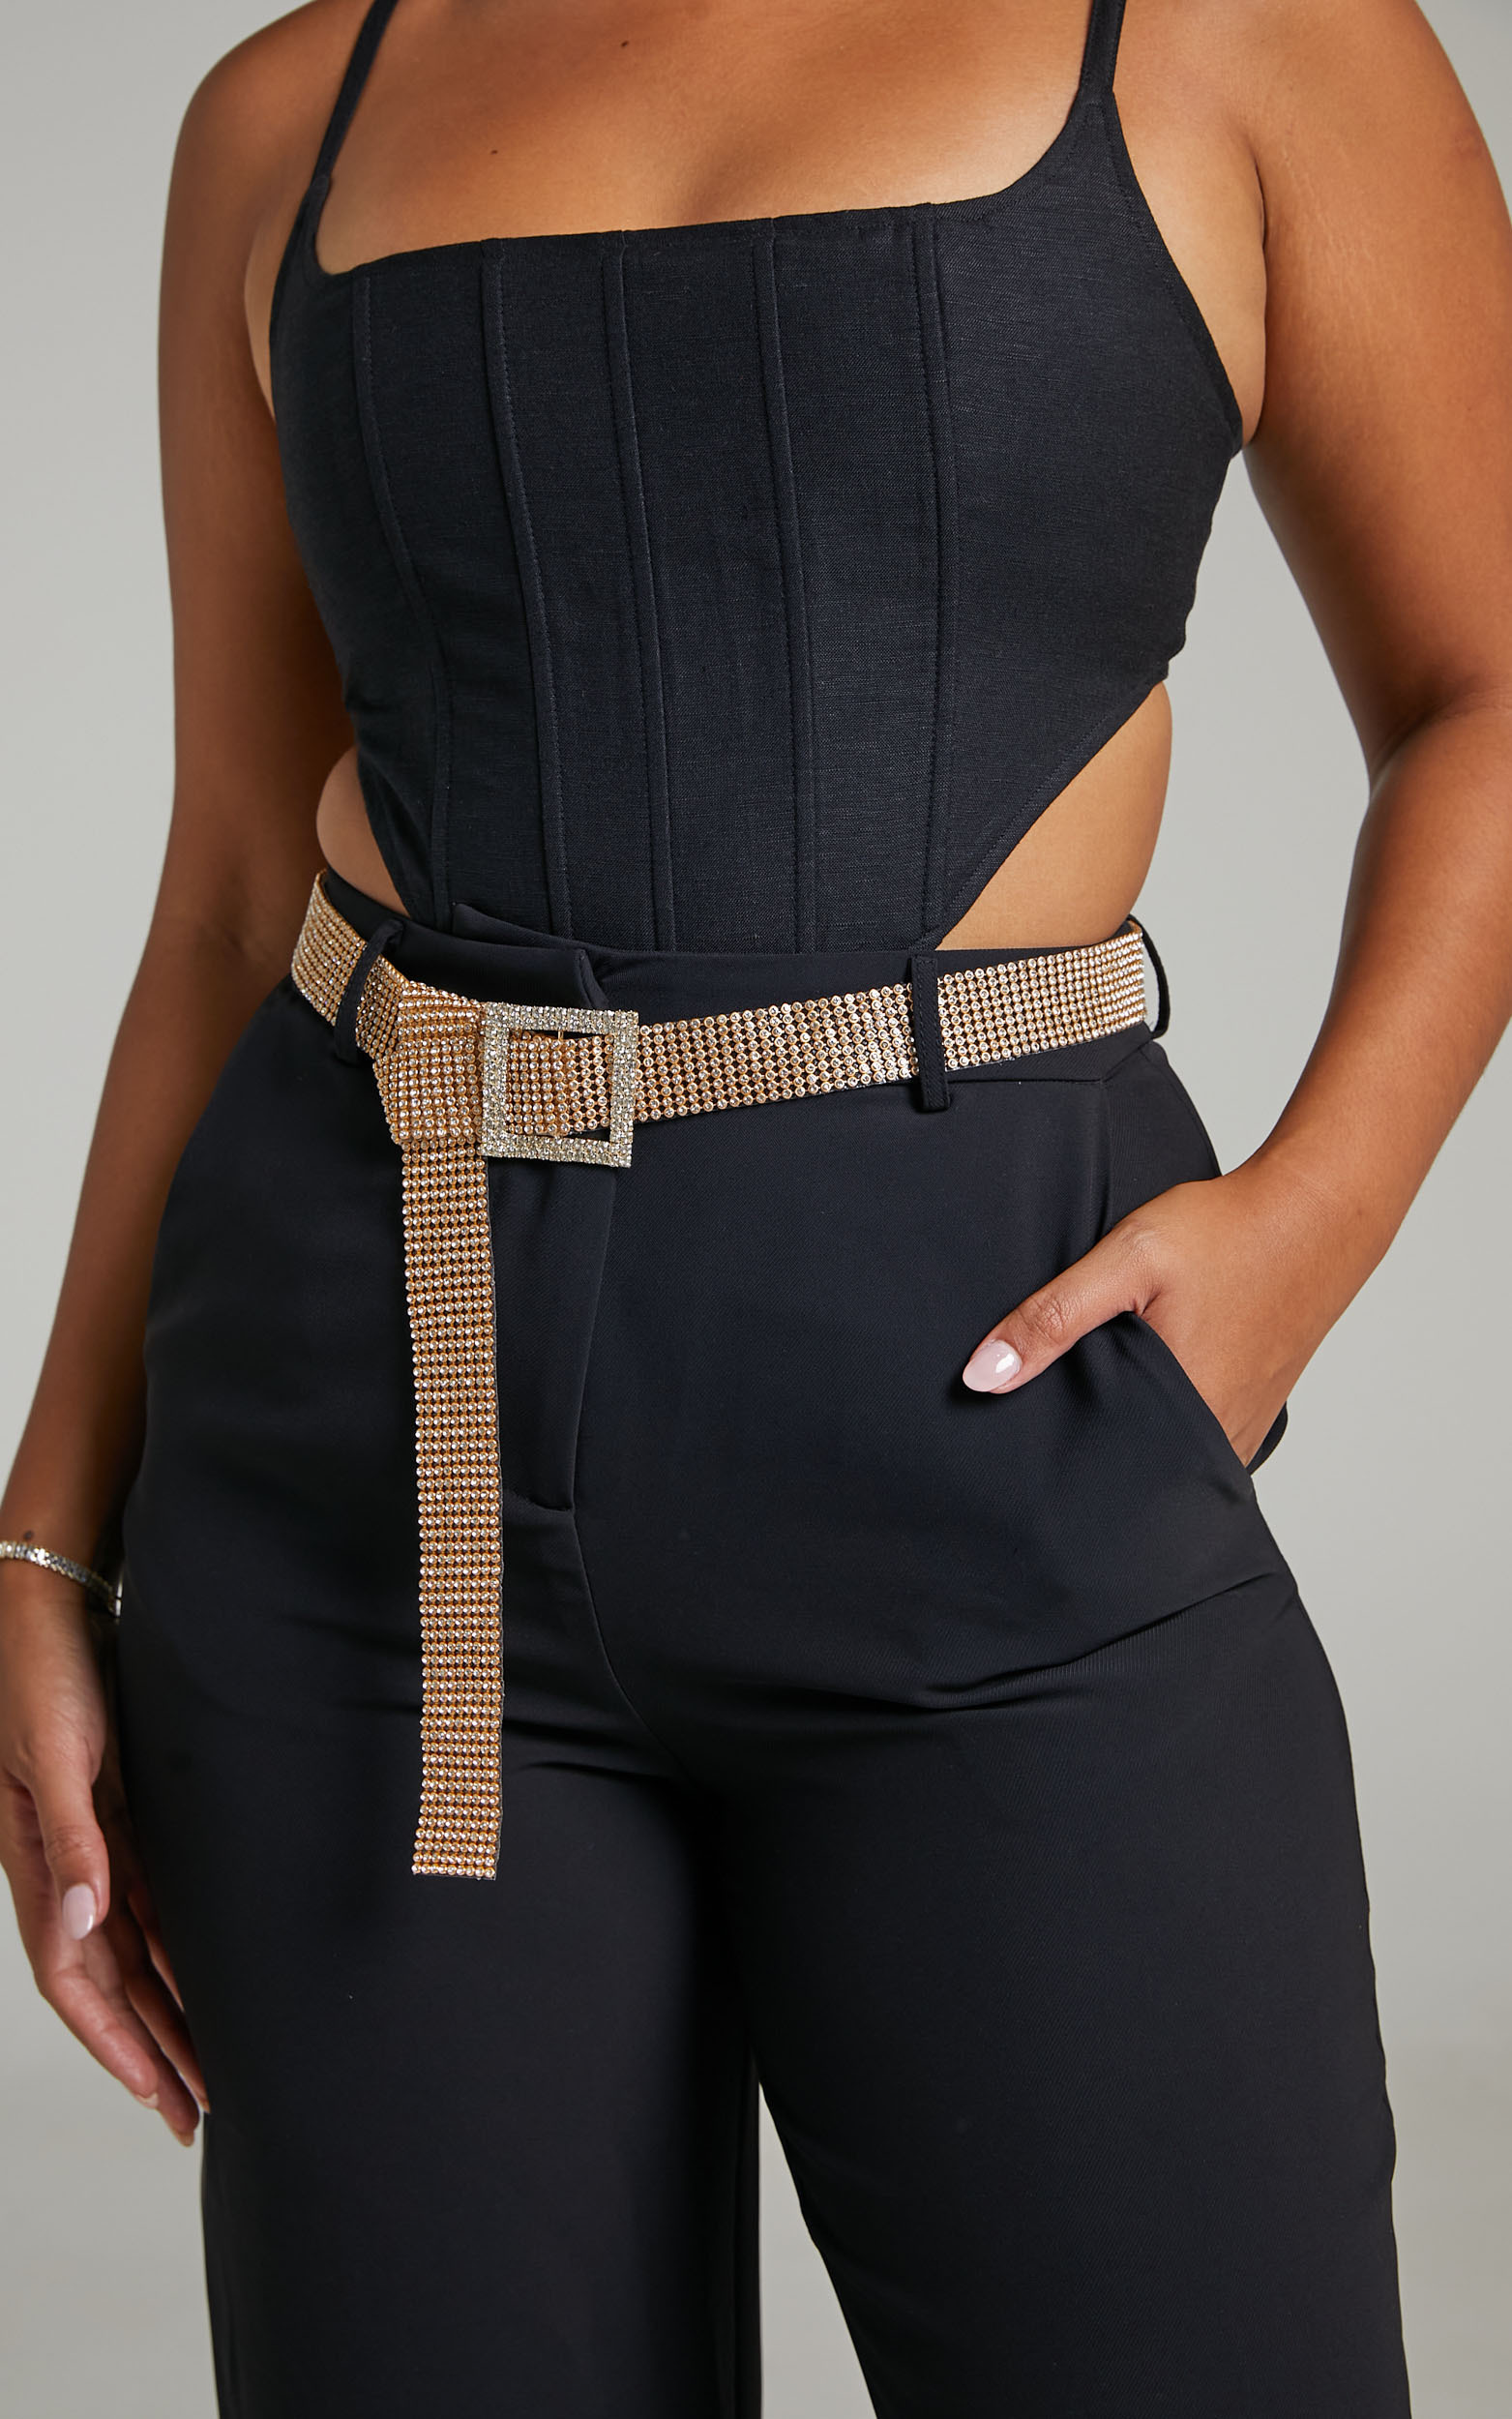 Saritha Chain Belt in Gold - NoSize, GLD1, hi-res image number null